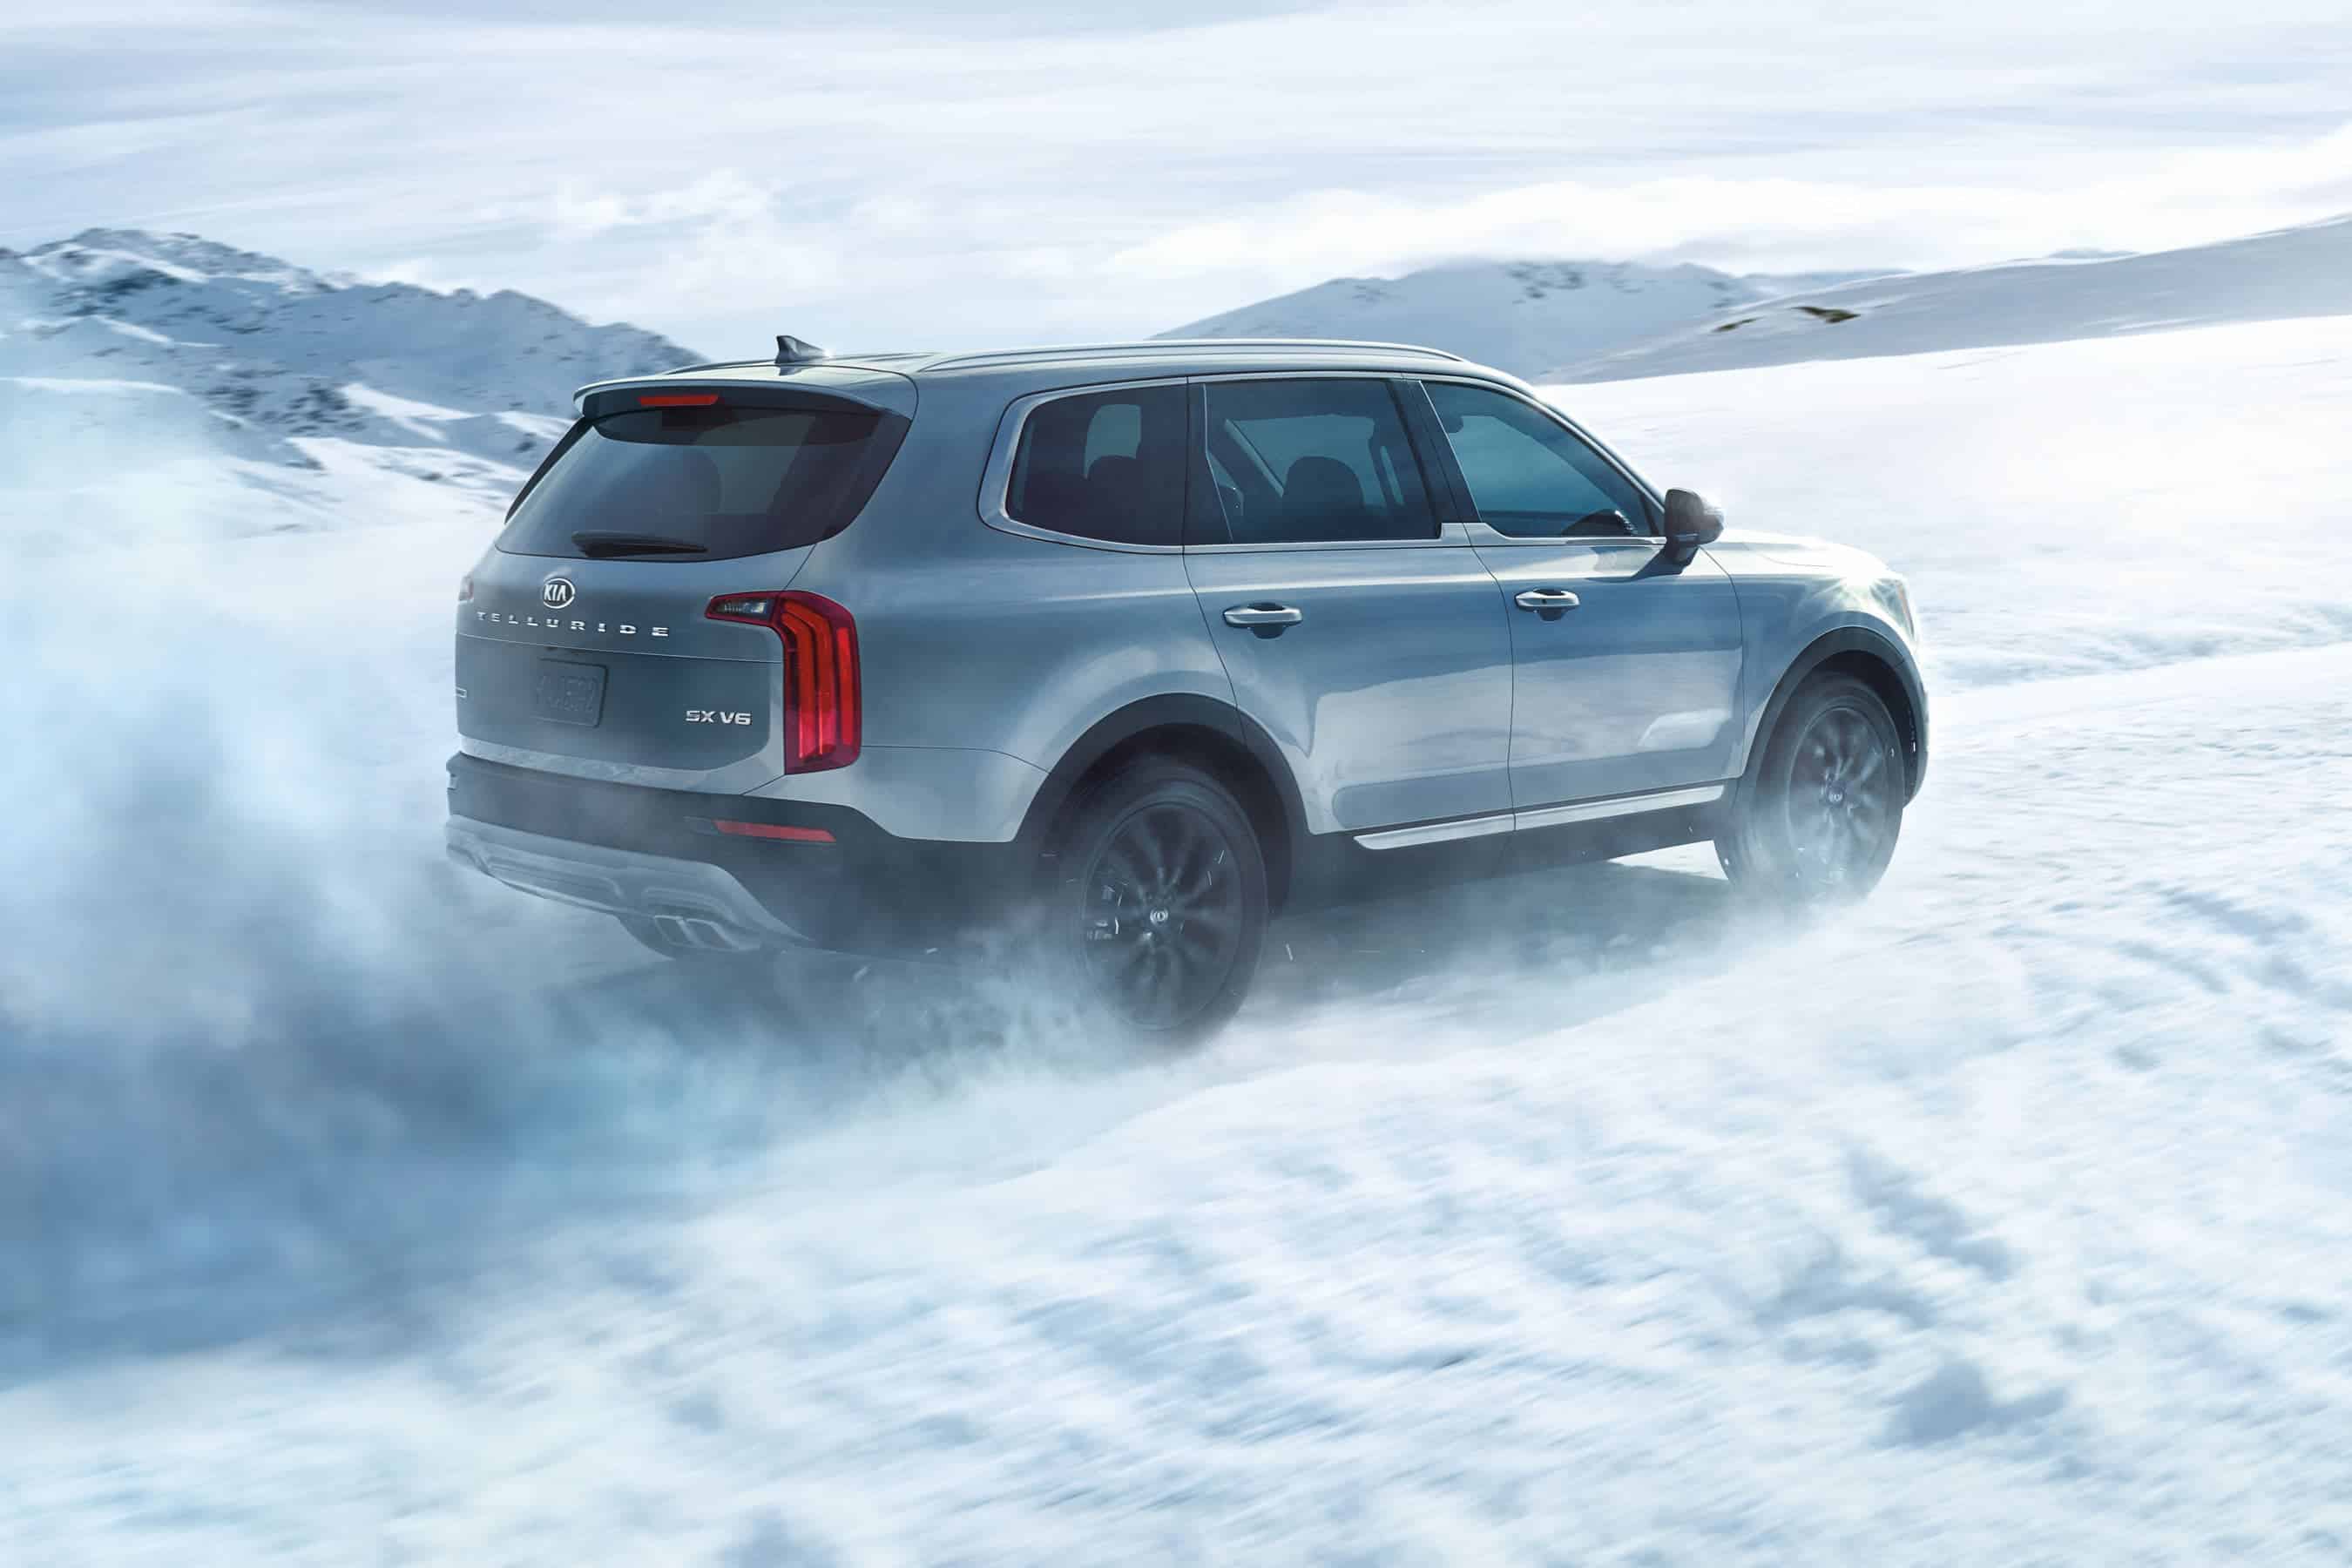 A silver Telluride is driving in the snow after winning the 2020 Kia Telluride vs 2020 Toyota Highlander comparison.